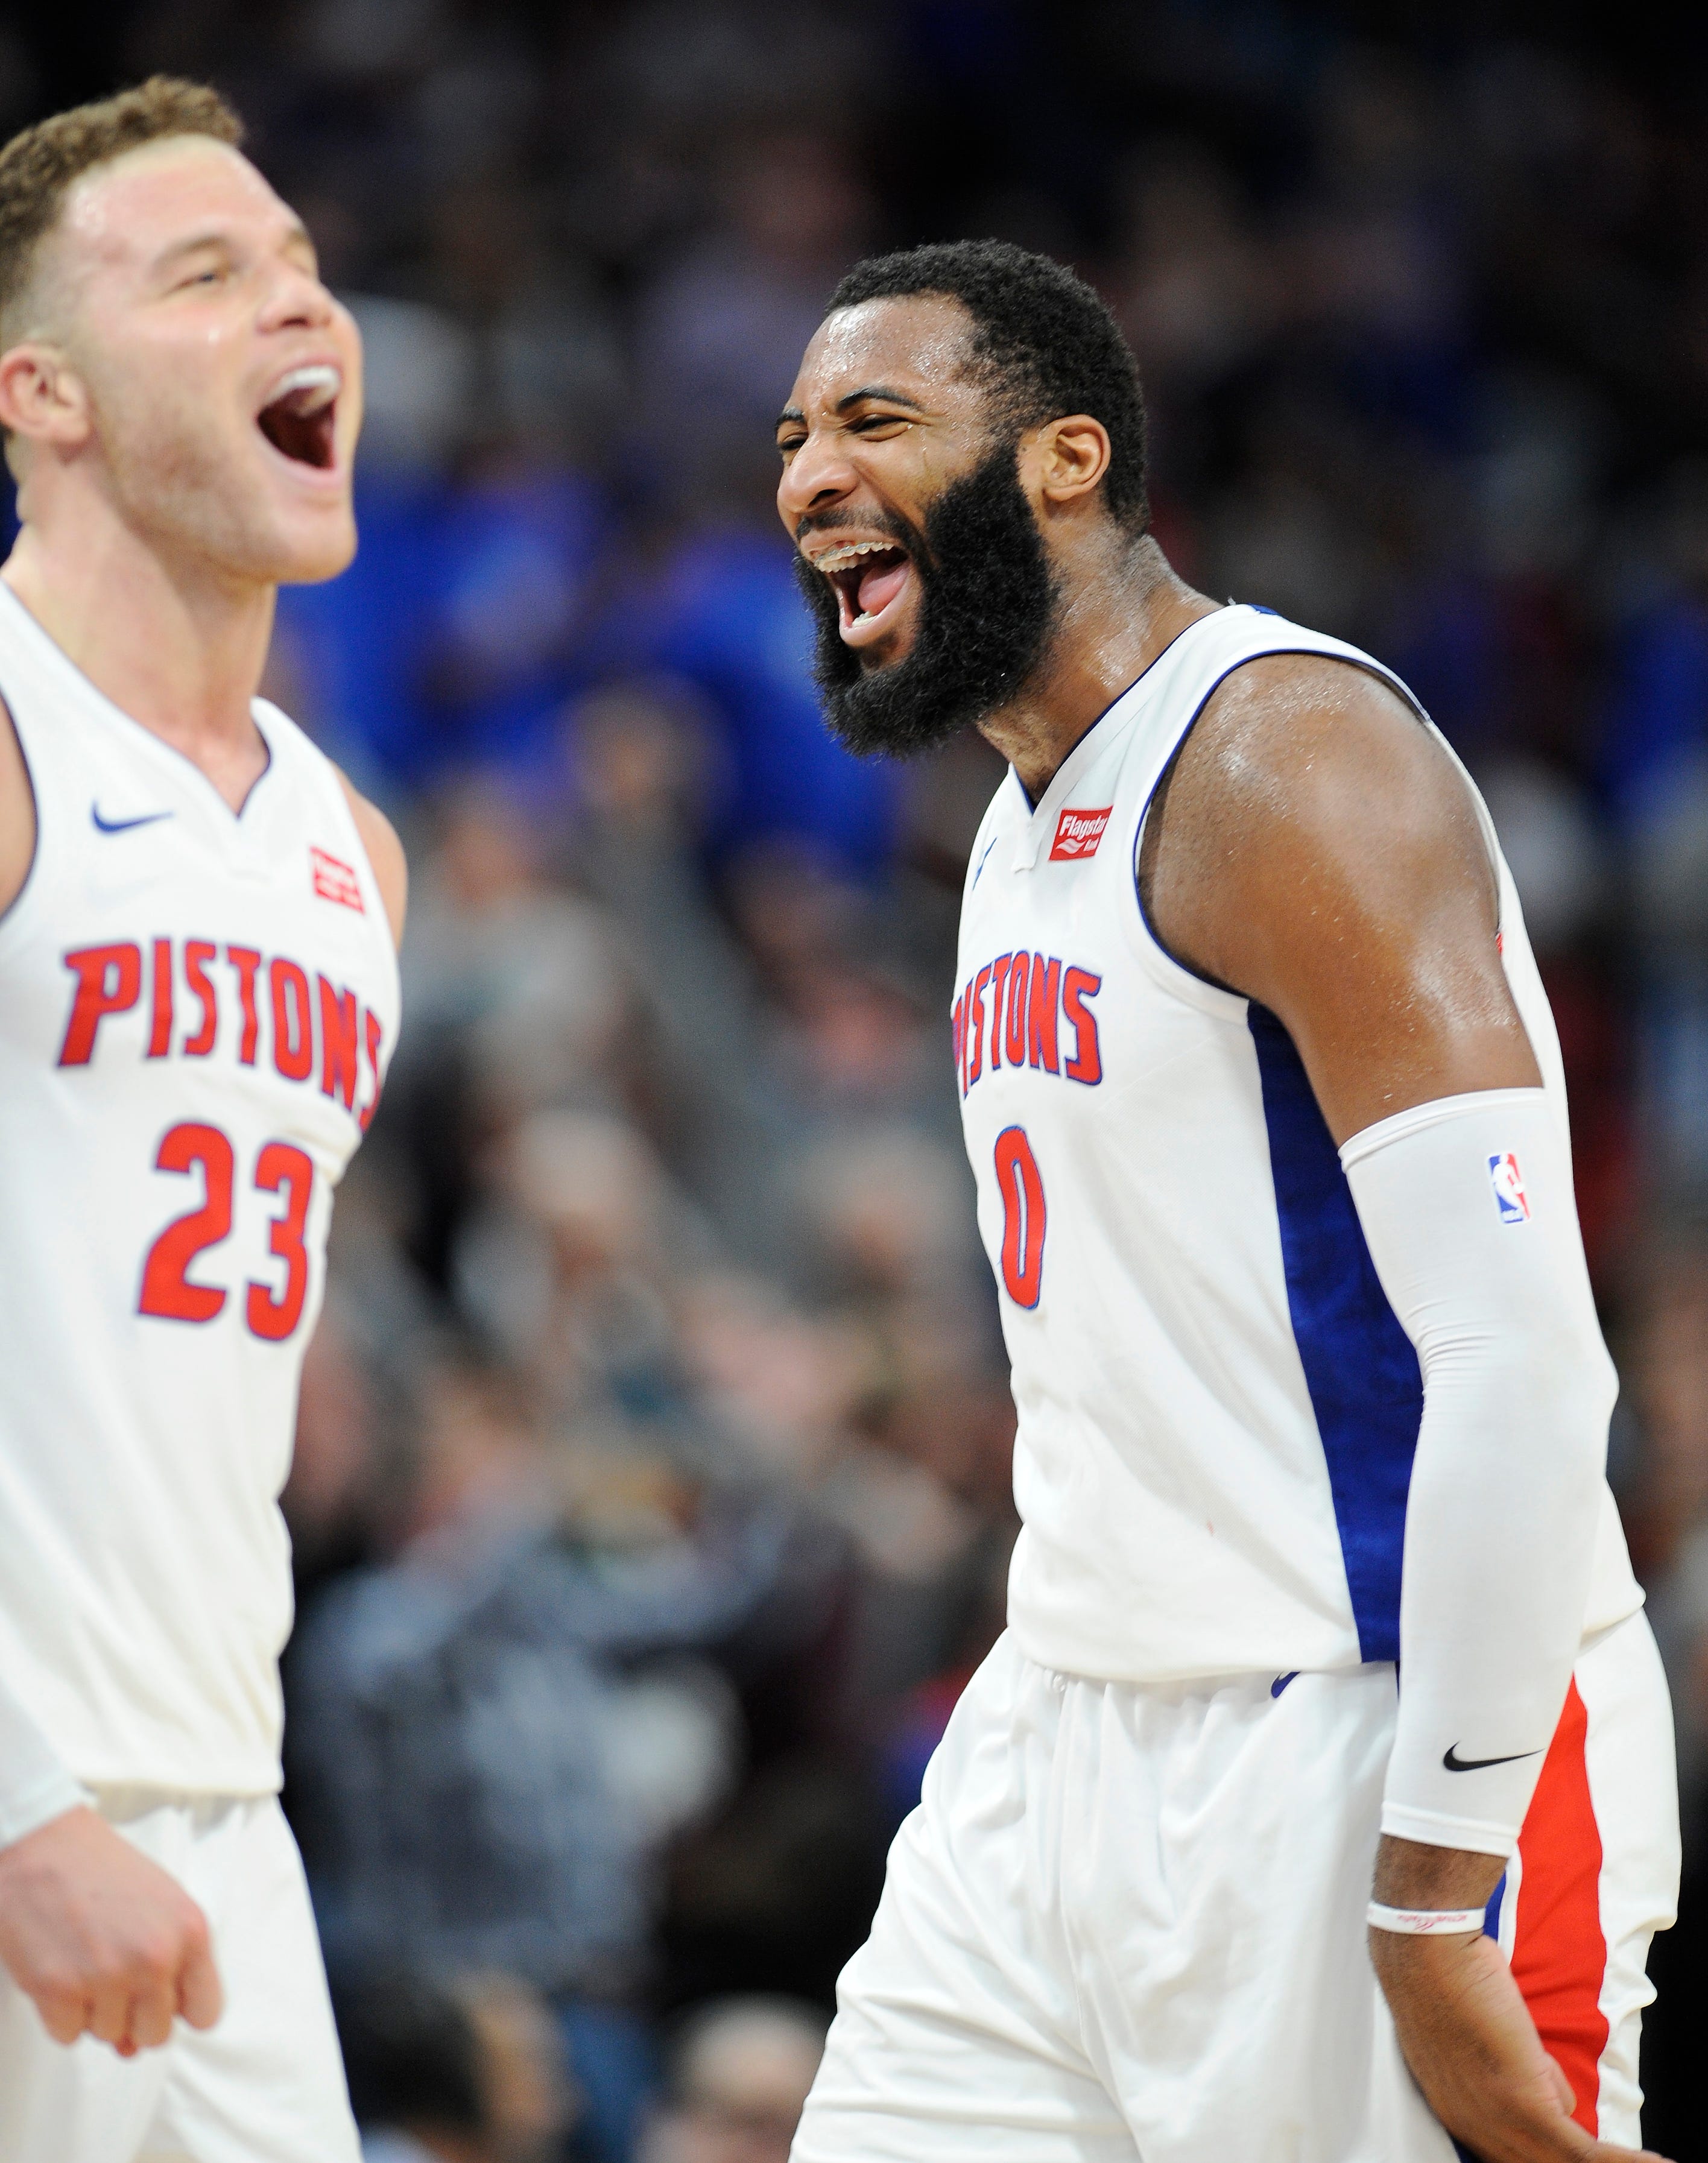 The Pistons' five-game preseason slate includes three home and finishes with two road games; the opener is against the Orlando Magic on Oct. 7 at Little Caesars Arena.